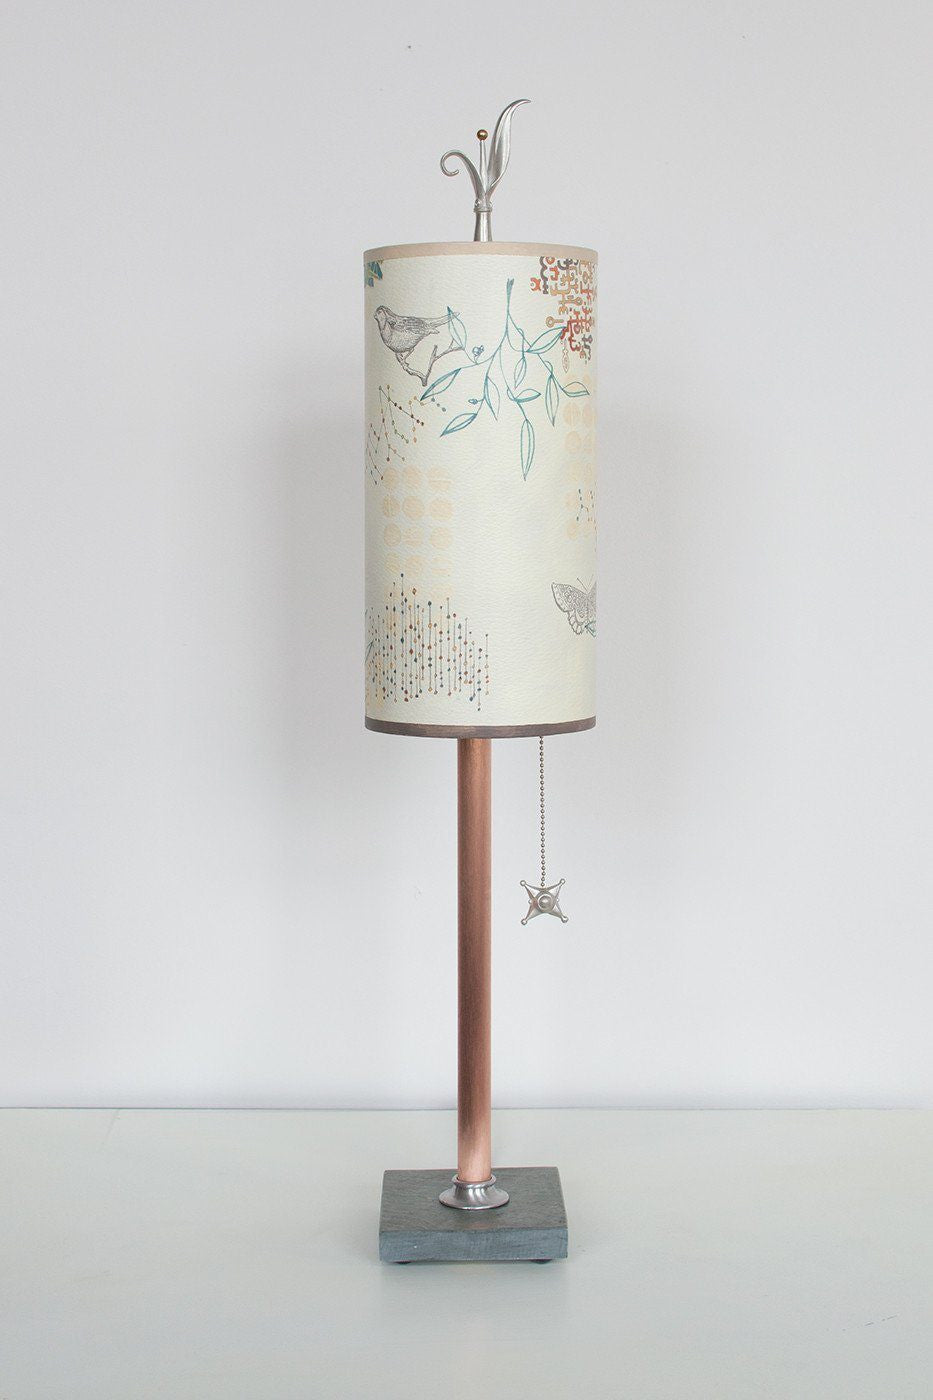 Janna Ugone &amp; Co Table Lamps Copper Table Lamp with Small Tube Shade in Ecru Journey